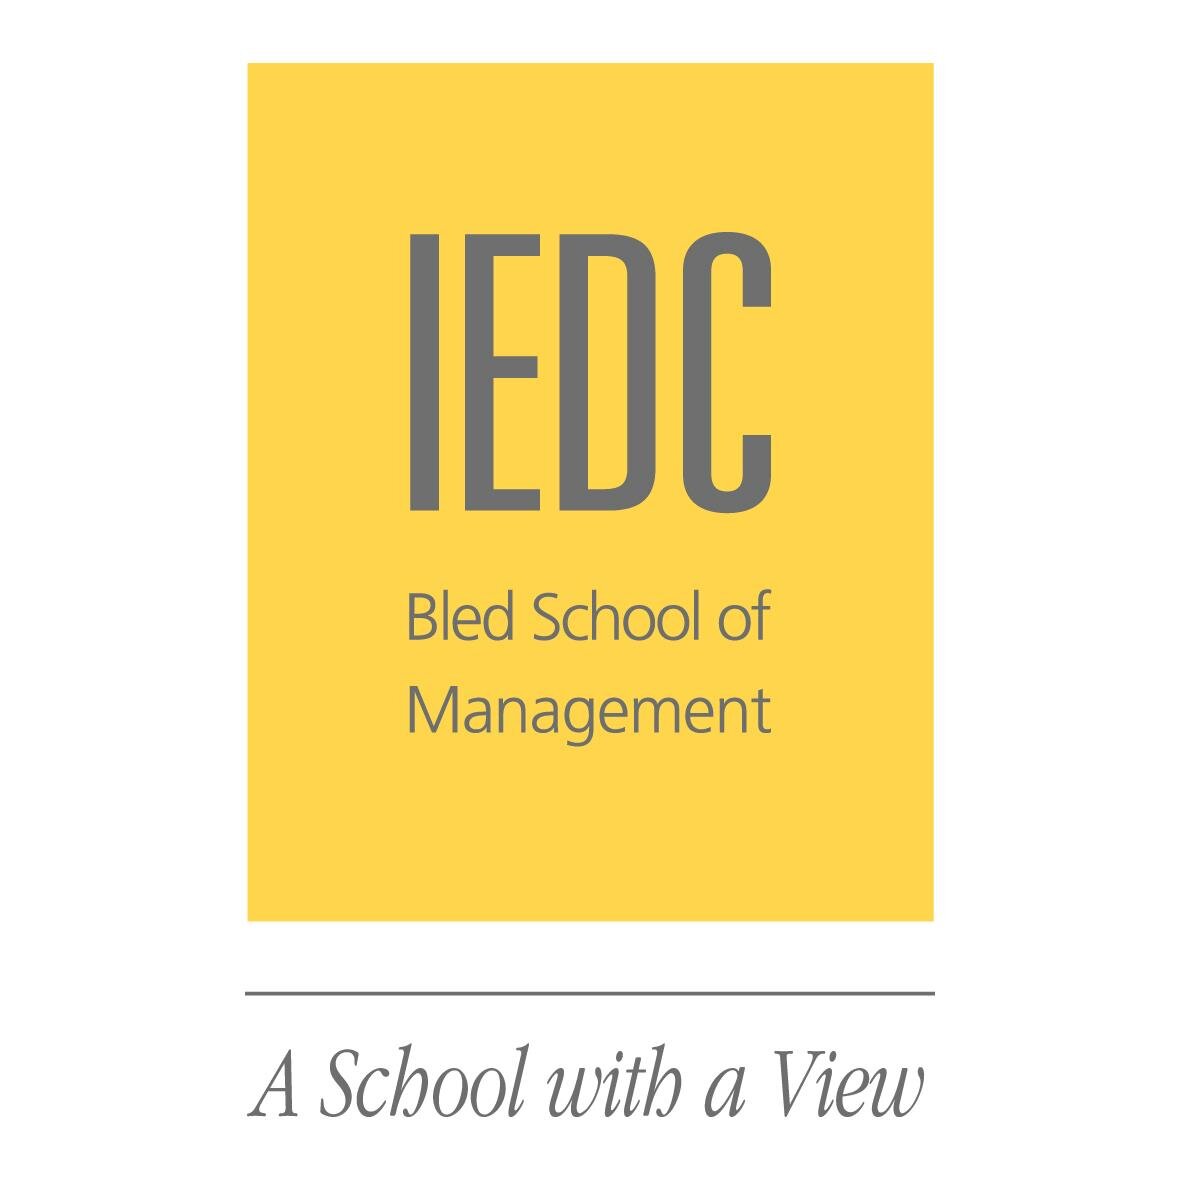 IEDC-Bled School of Management is one of the leading innovators in business education...